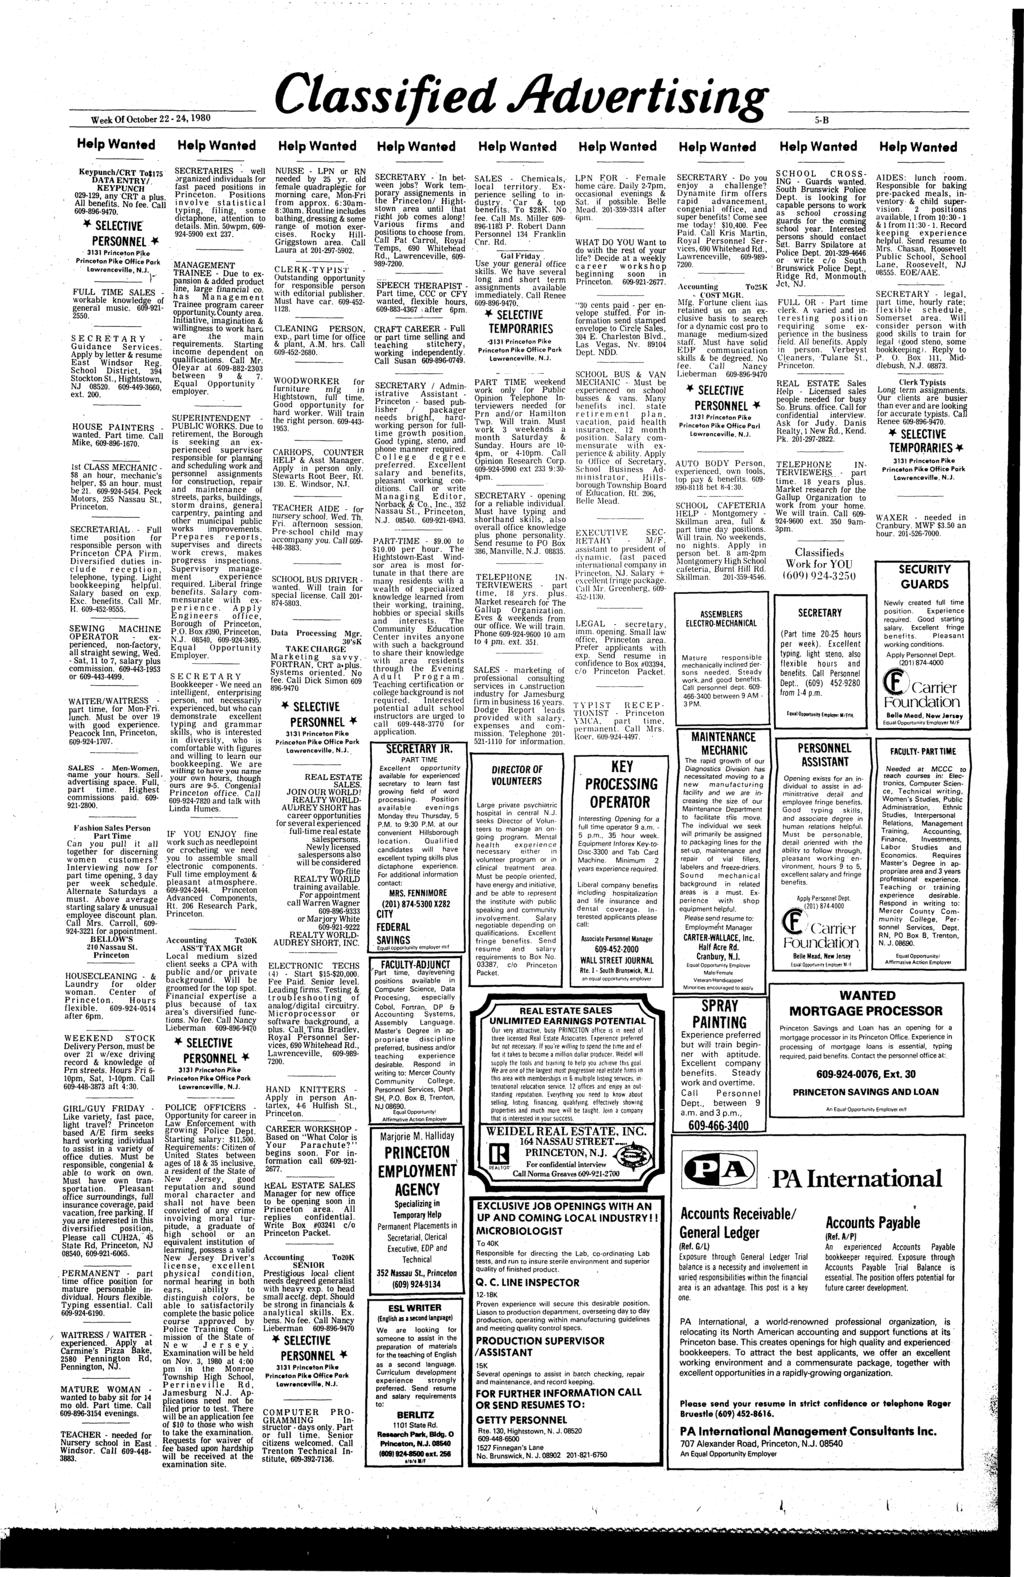 Week Of October 22-24,1980 Classified Advertising 5-B Help Wanted Help Wanted Help Wanted Help Wanted Help Wanted Help Wanted Help Wanted Help Wanted Help Wanted Keypunch/CRT To$l75 DATA ENTRY/